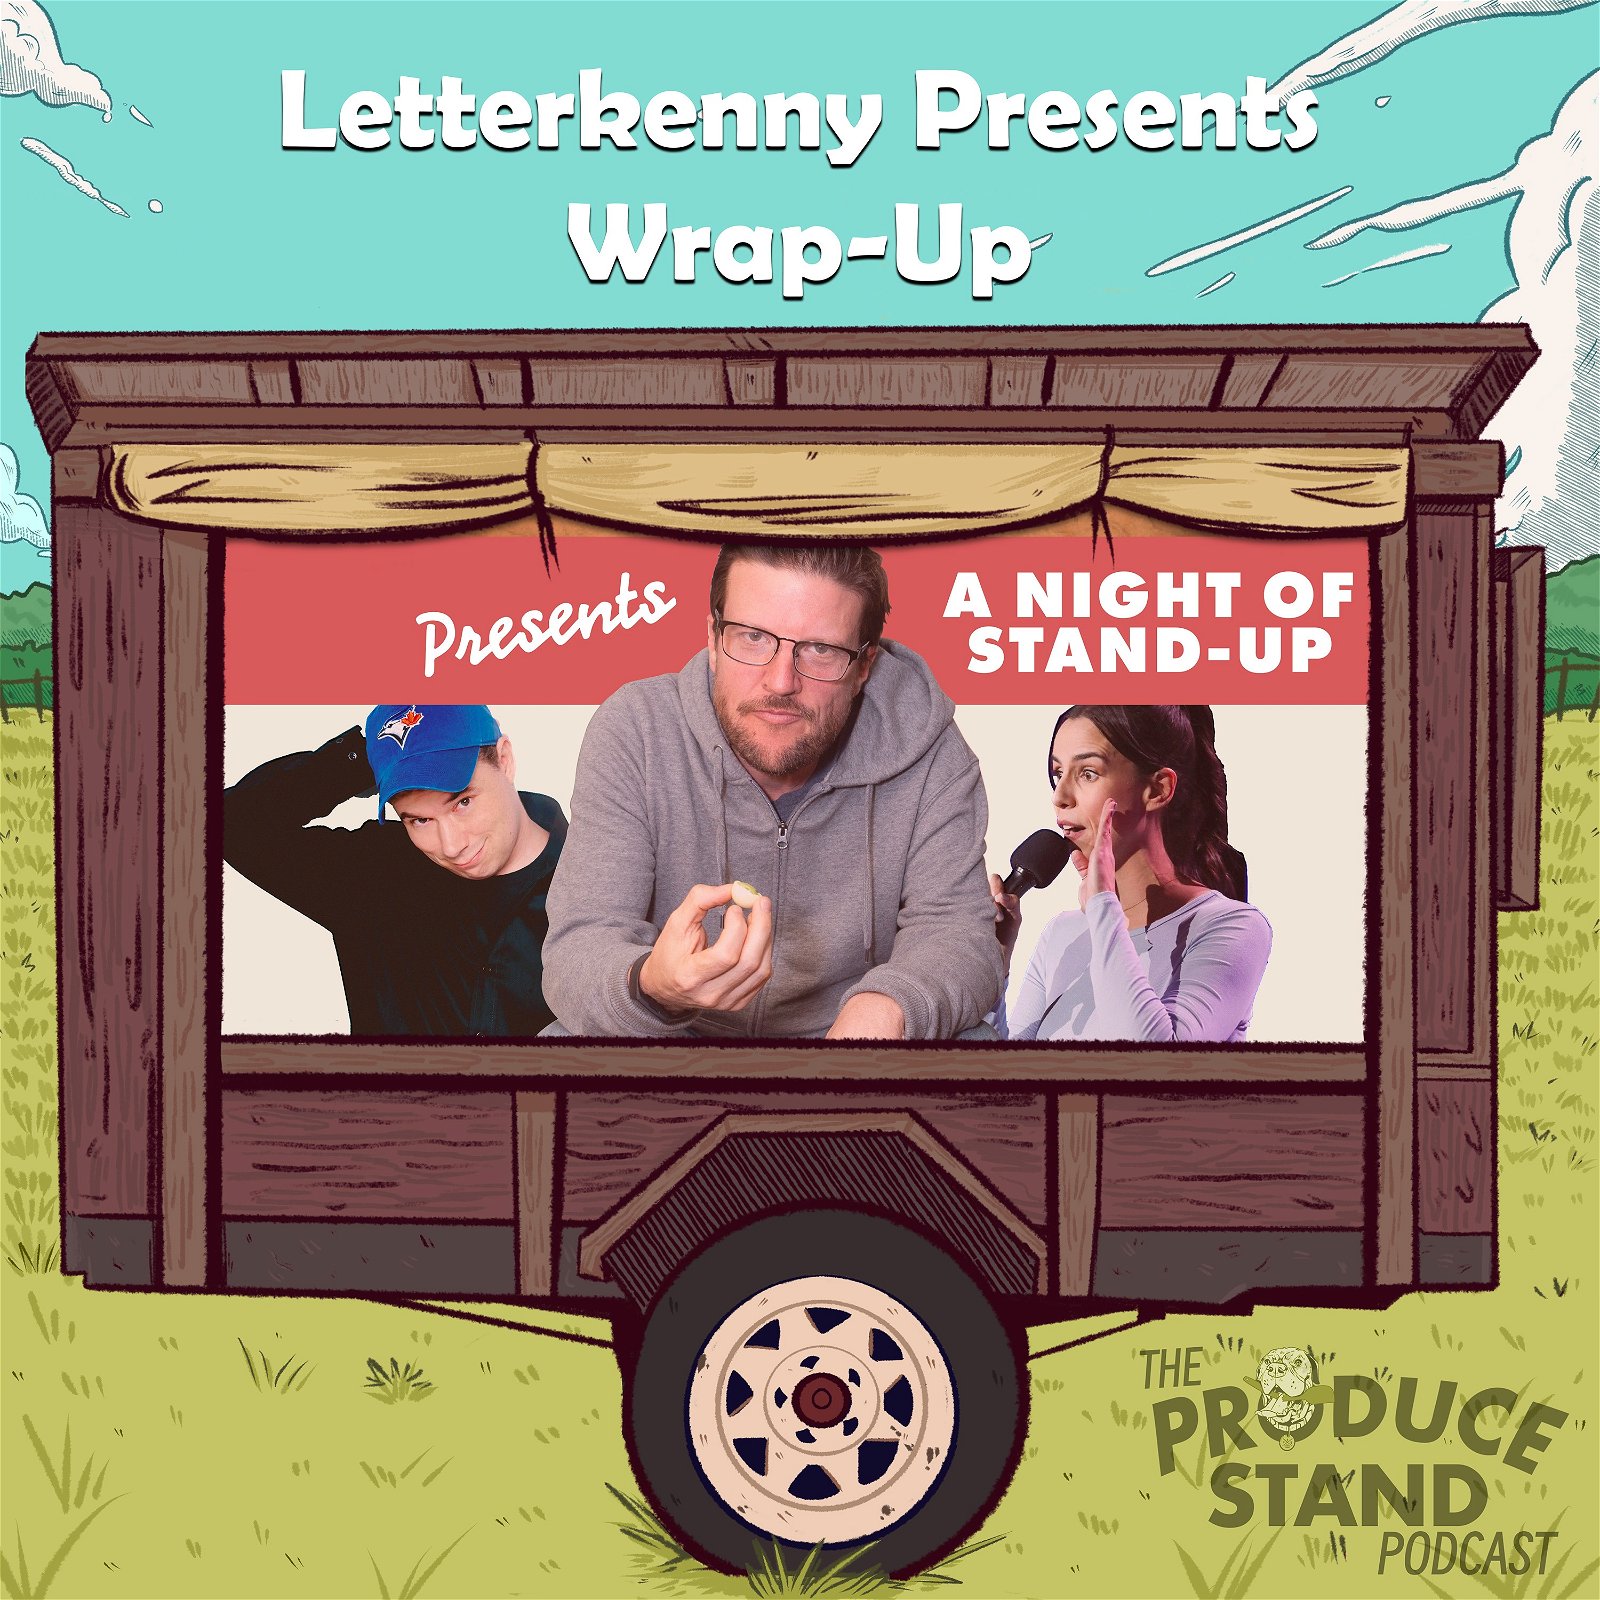 Episode cover art for TPS237: Letterkenny Presents Wrap-Up